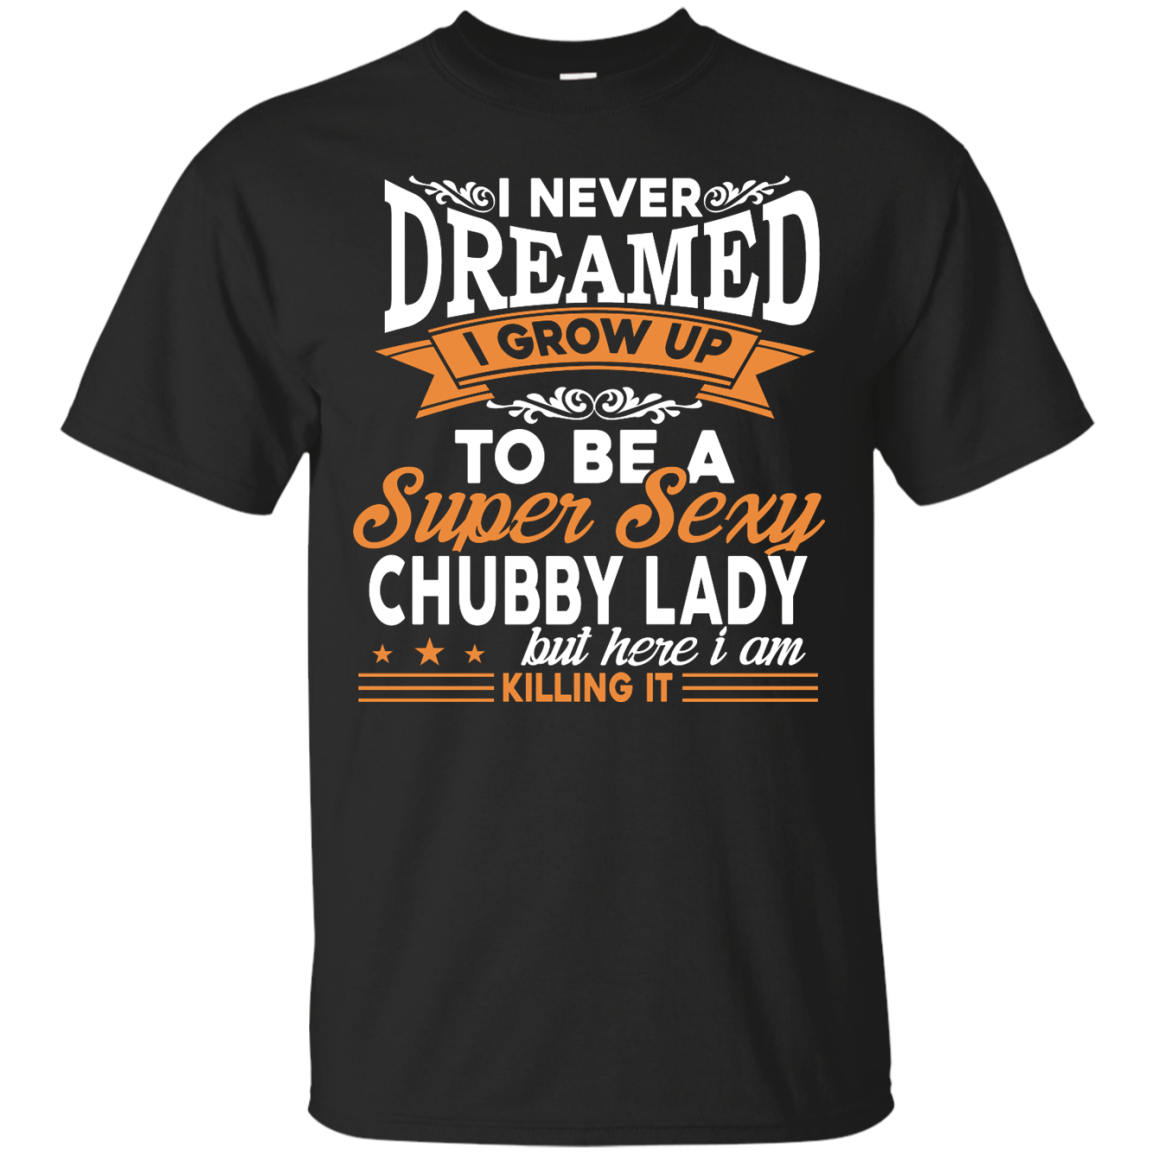 Grow up to be a super sexy chubby lady shirt